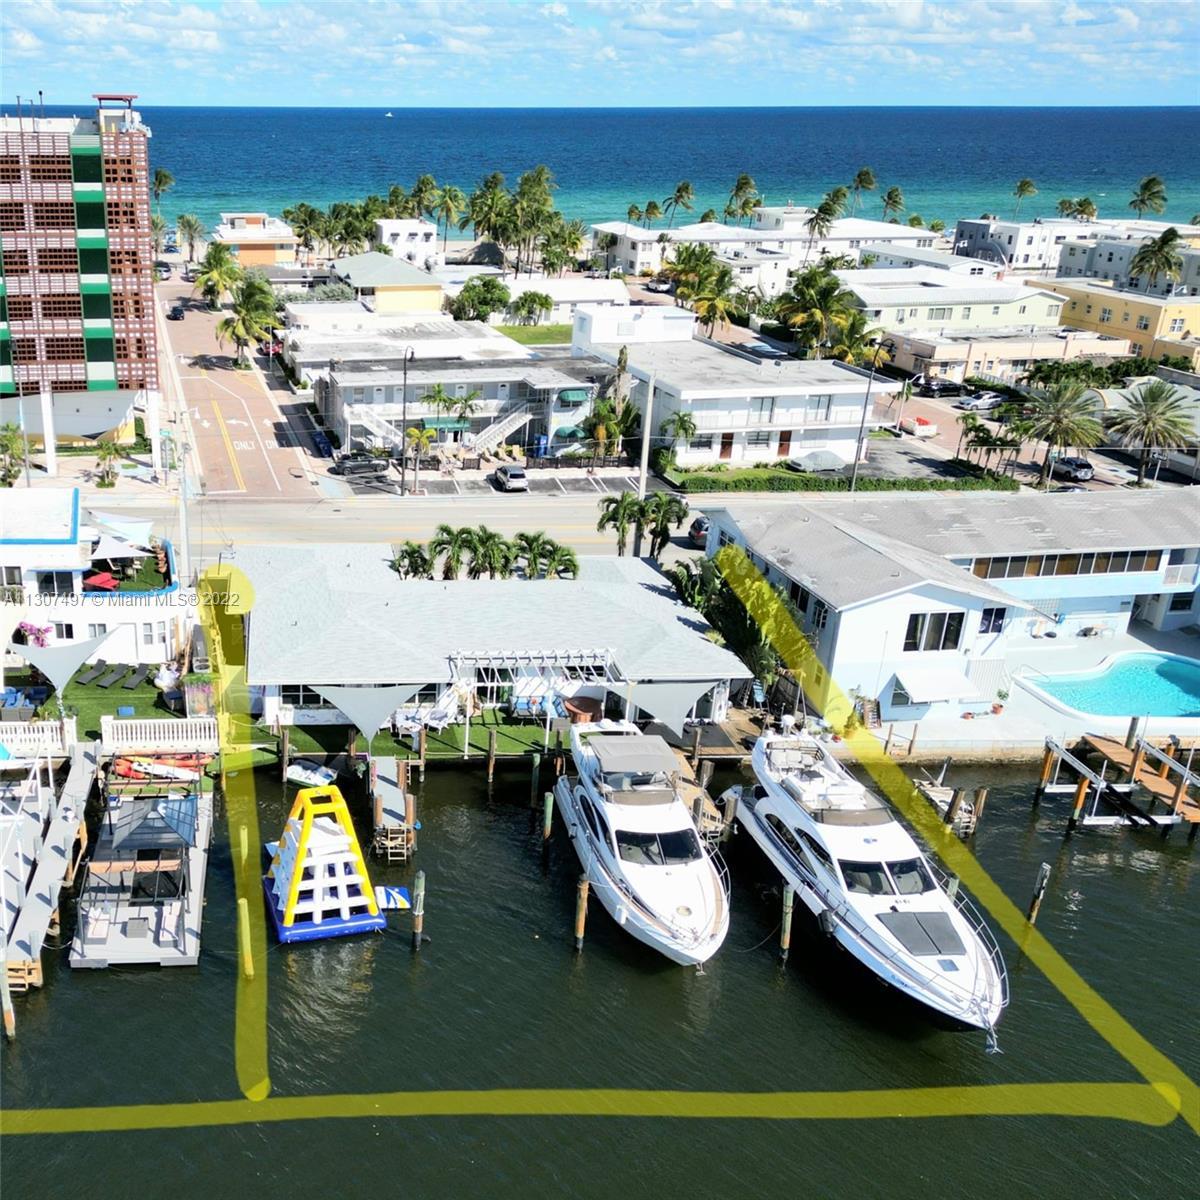 Mini-Marina Resort on the water. 4 apartments building + 4 Large boat slips, 200 feet of dockage, st